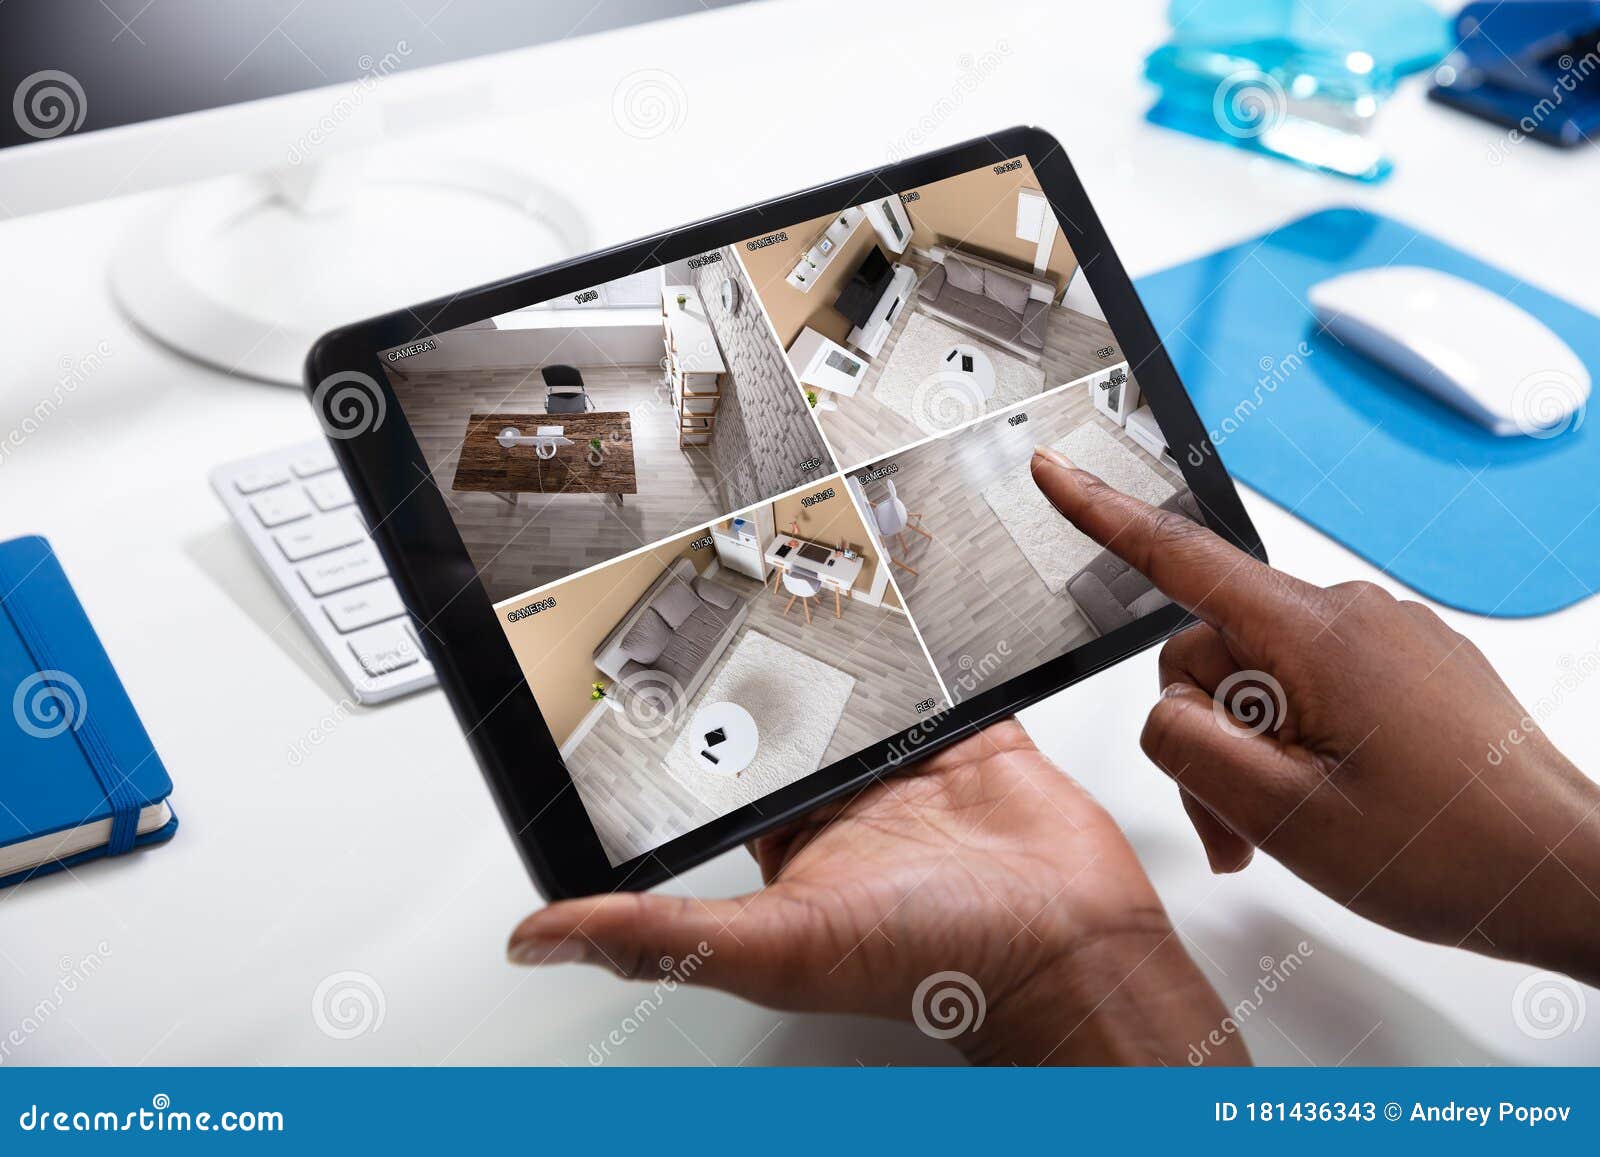 person`s hand monitoring cctv footage on tablet